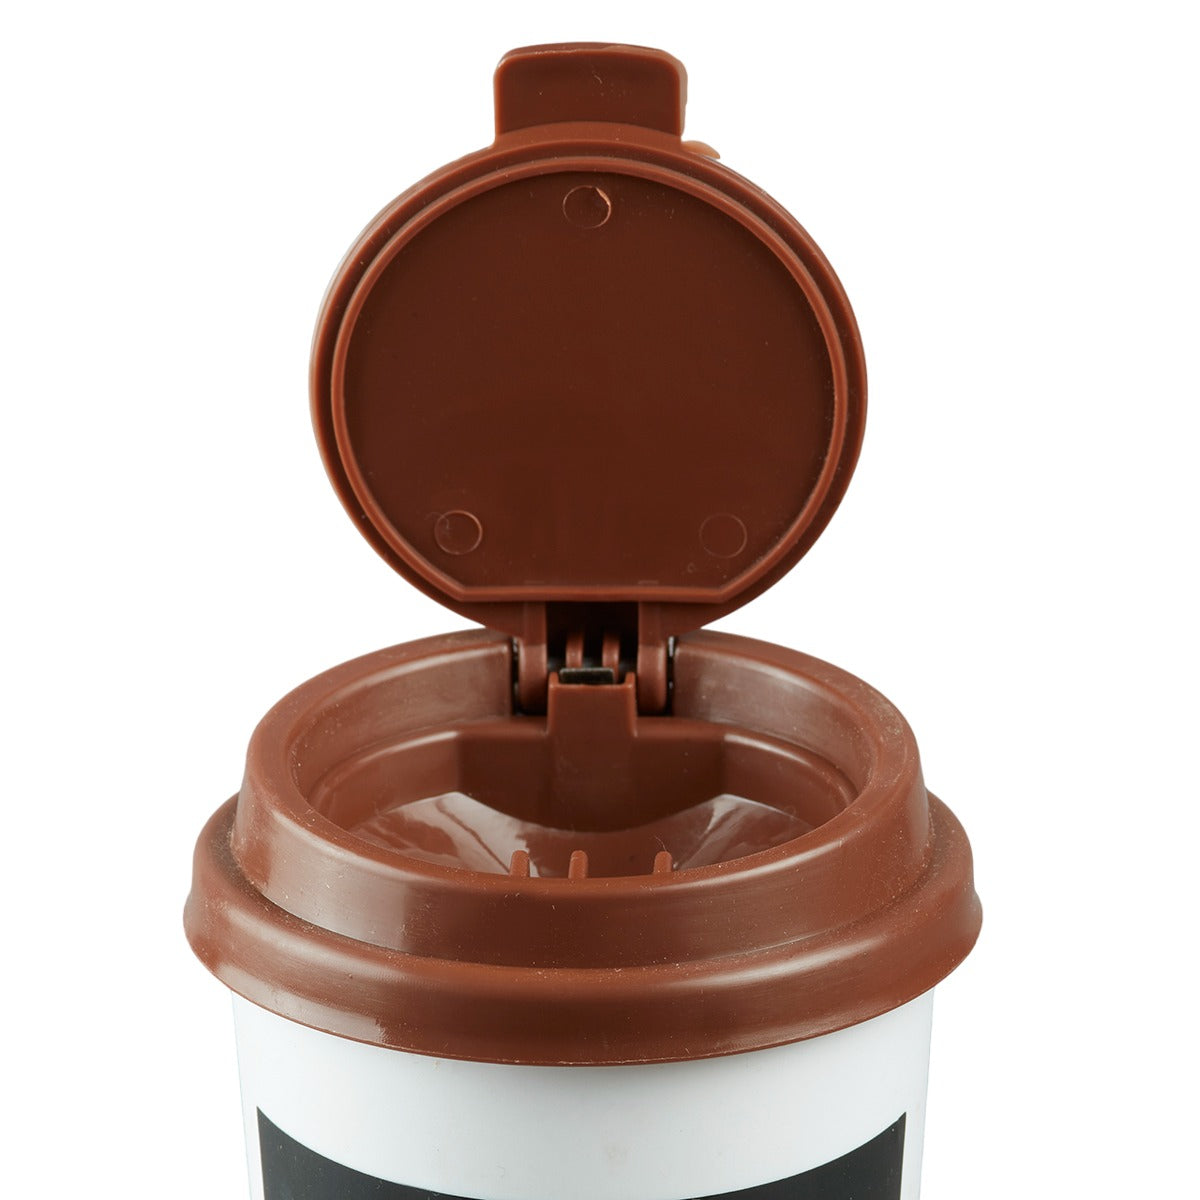 Plastic Car Ashtray Bucket with Lid for Smokers (9794)